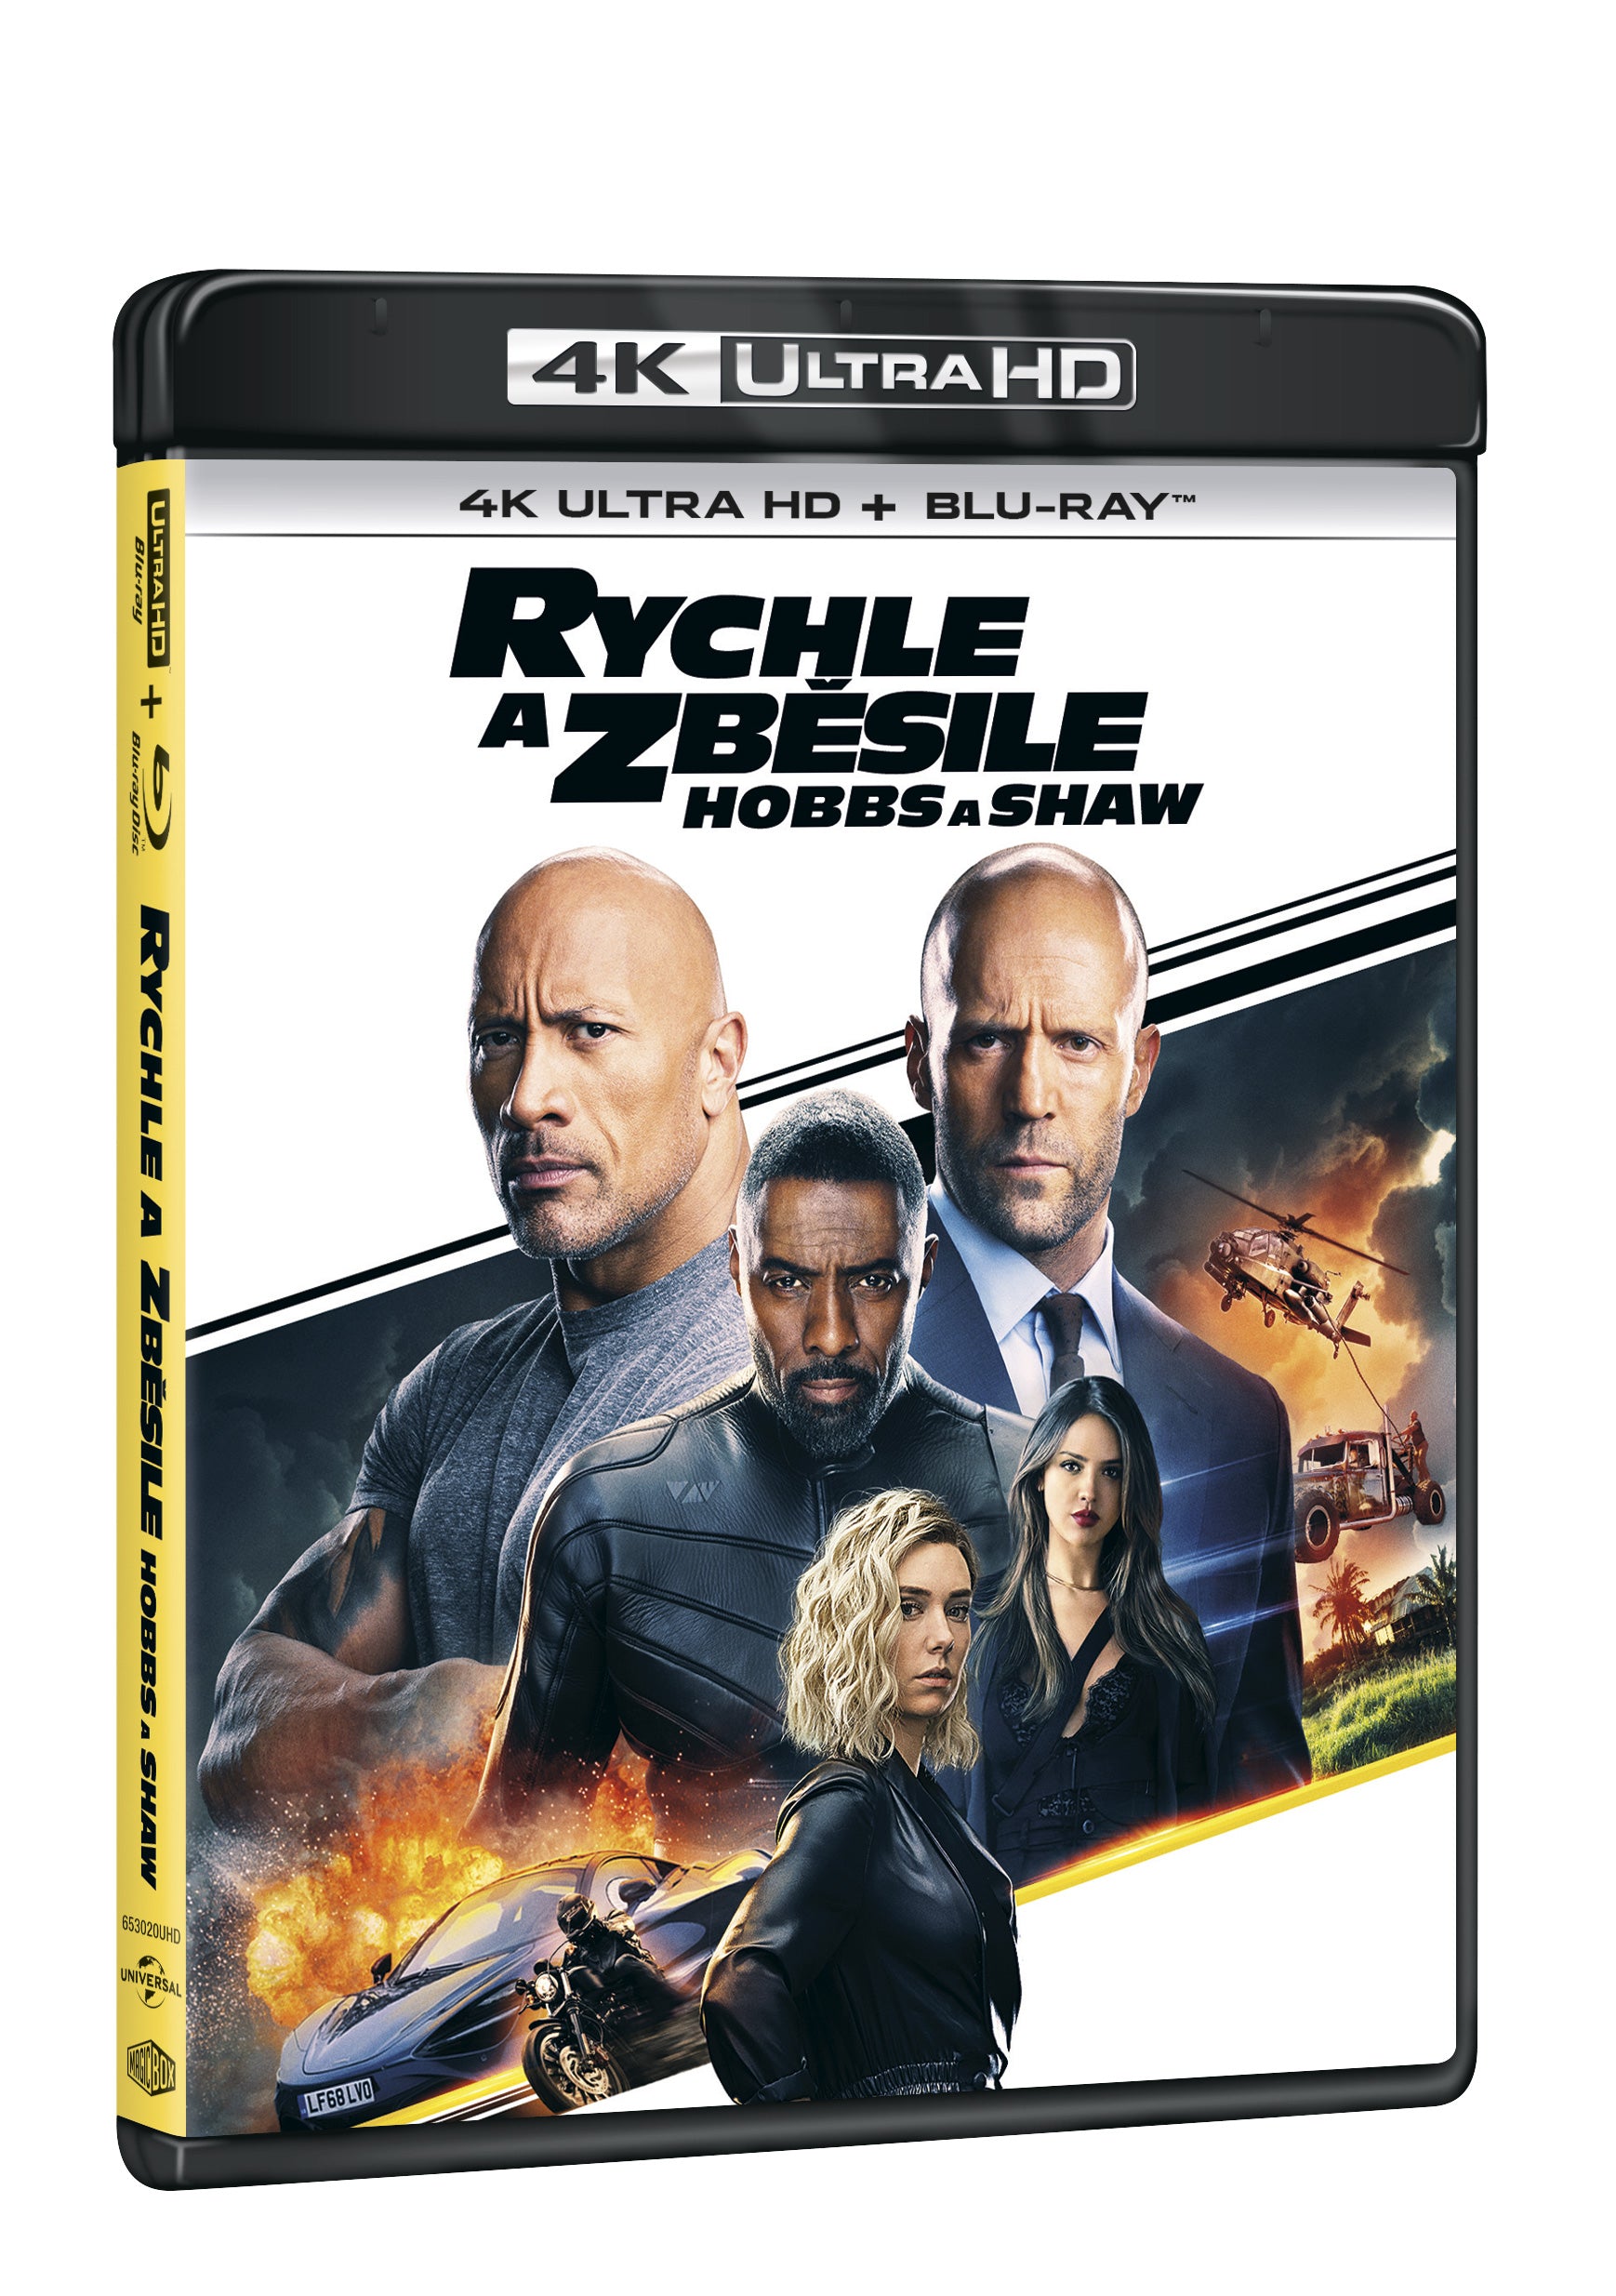 Rychle a zbesile: Hobbs a Shaw 2BD (UHD+BD) / Fast & Furious Presents: Hobbs & Shaw - Czech version